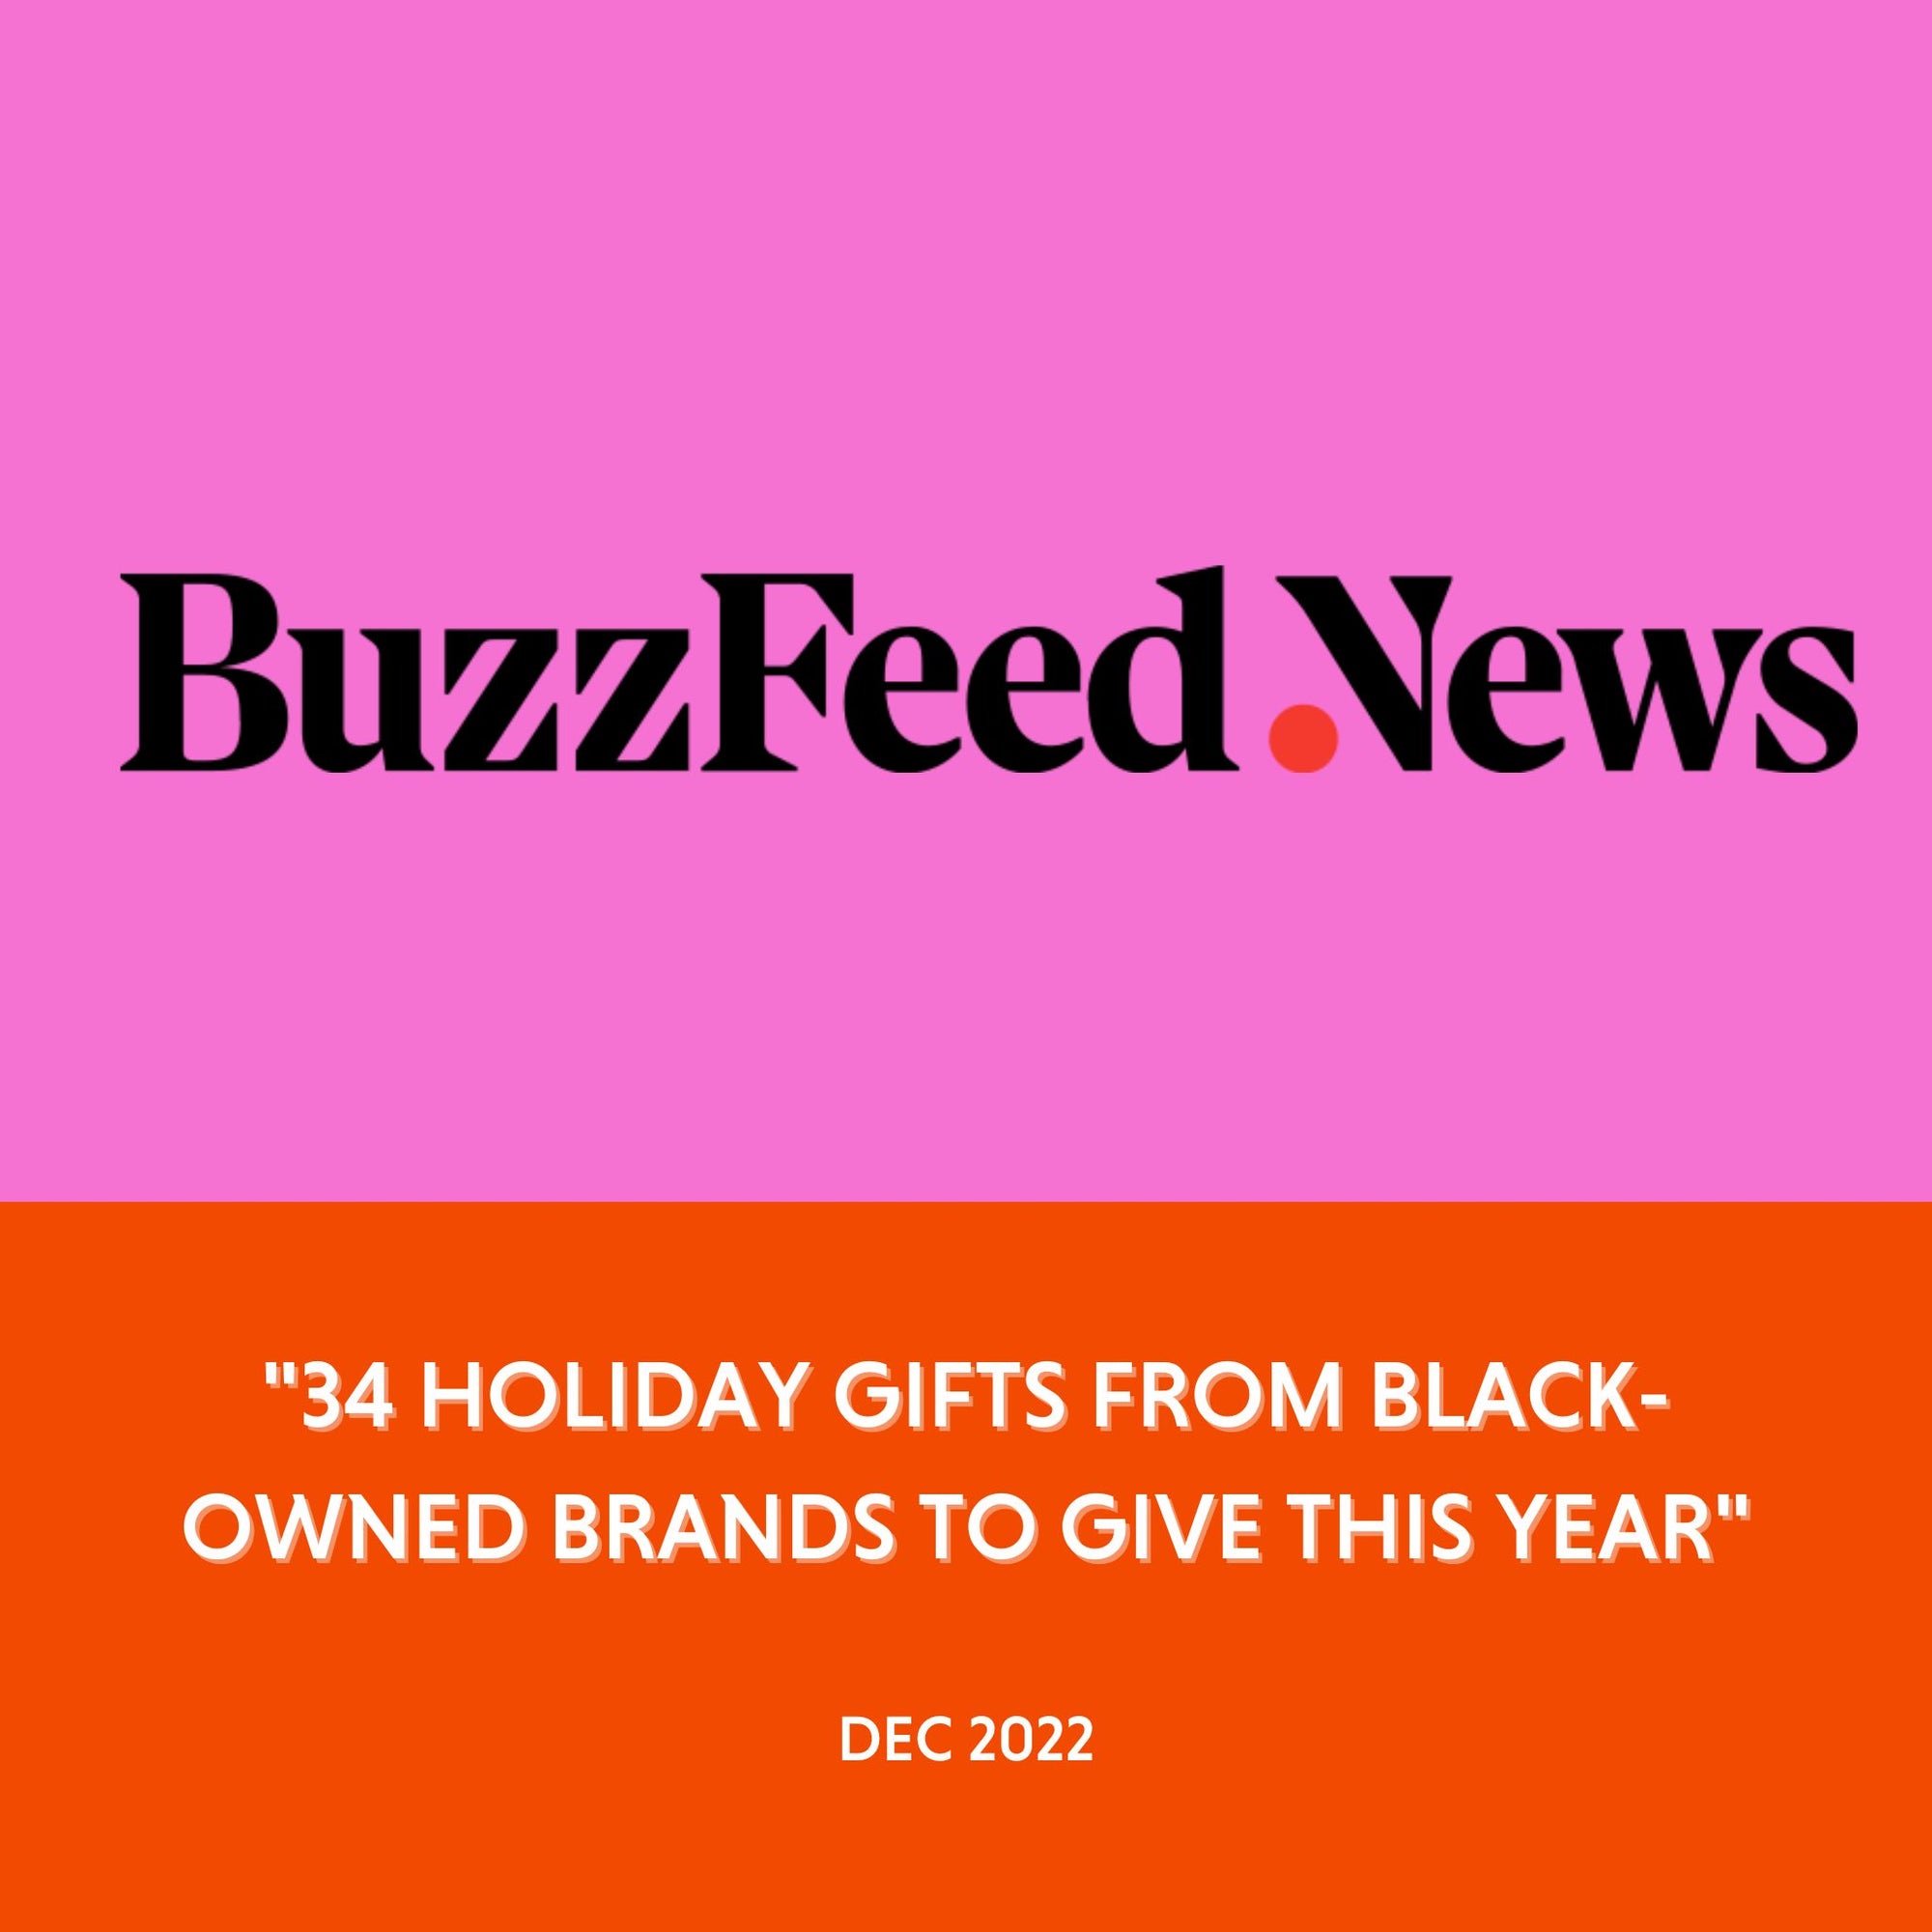 Buzzfeed News - "34 Holiday Gifts From Black-Owned Brands To Give This Year" - Dec 2022